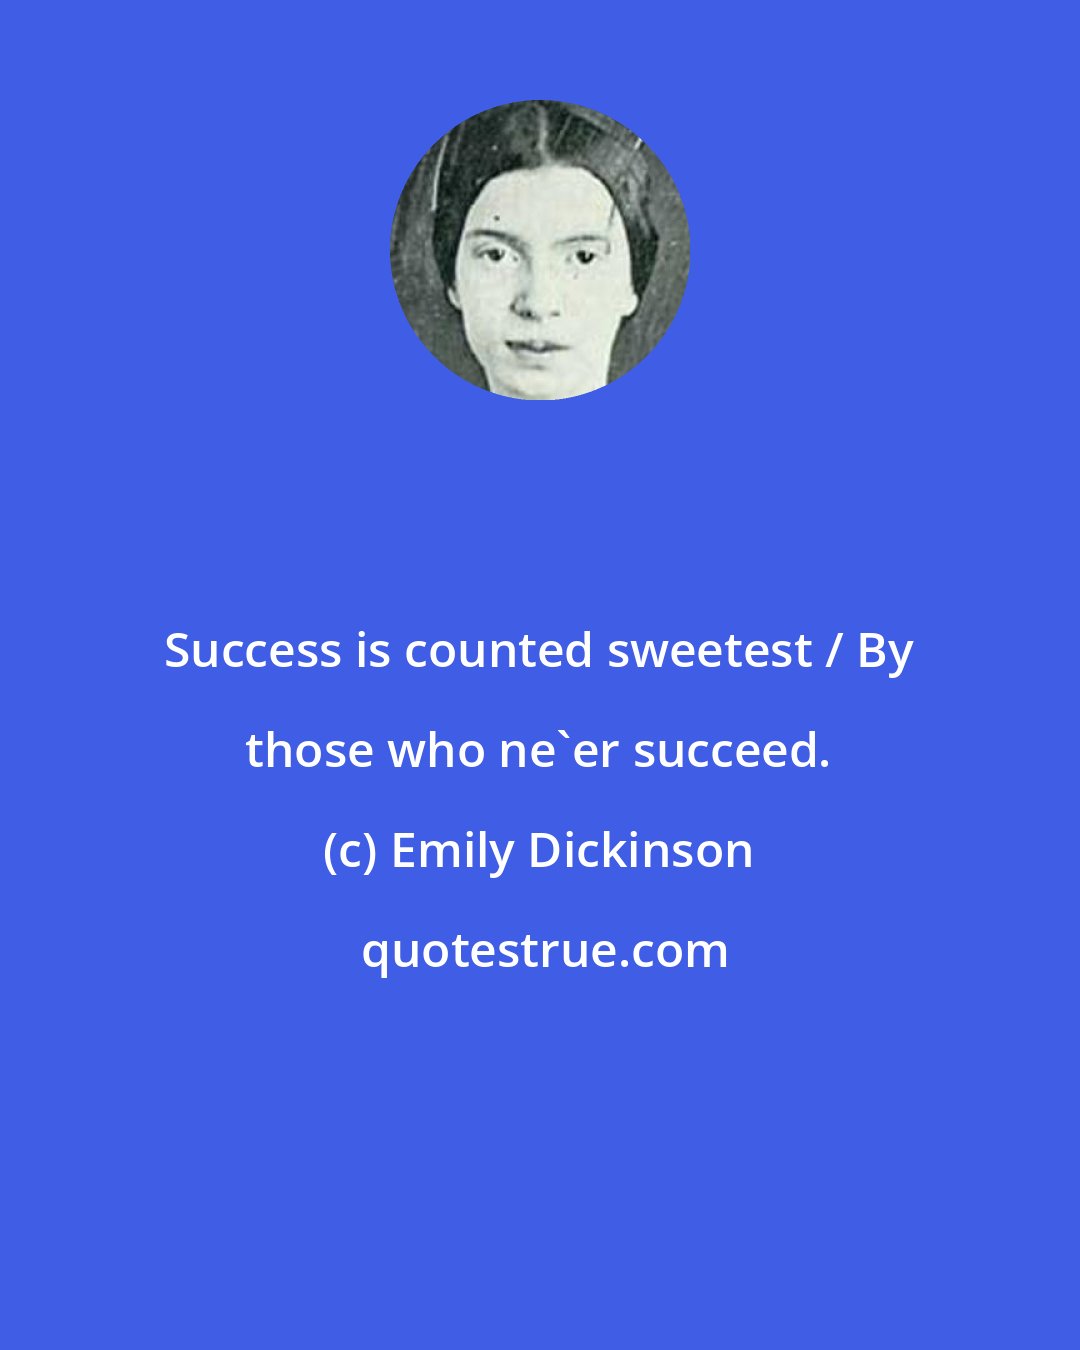 Emily Dickinson: Success is counted sweetest / By those who ne'er succeed.